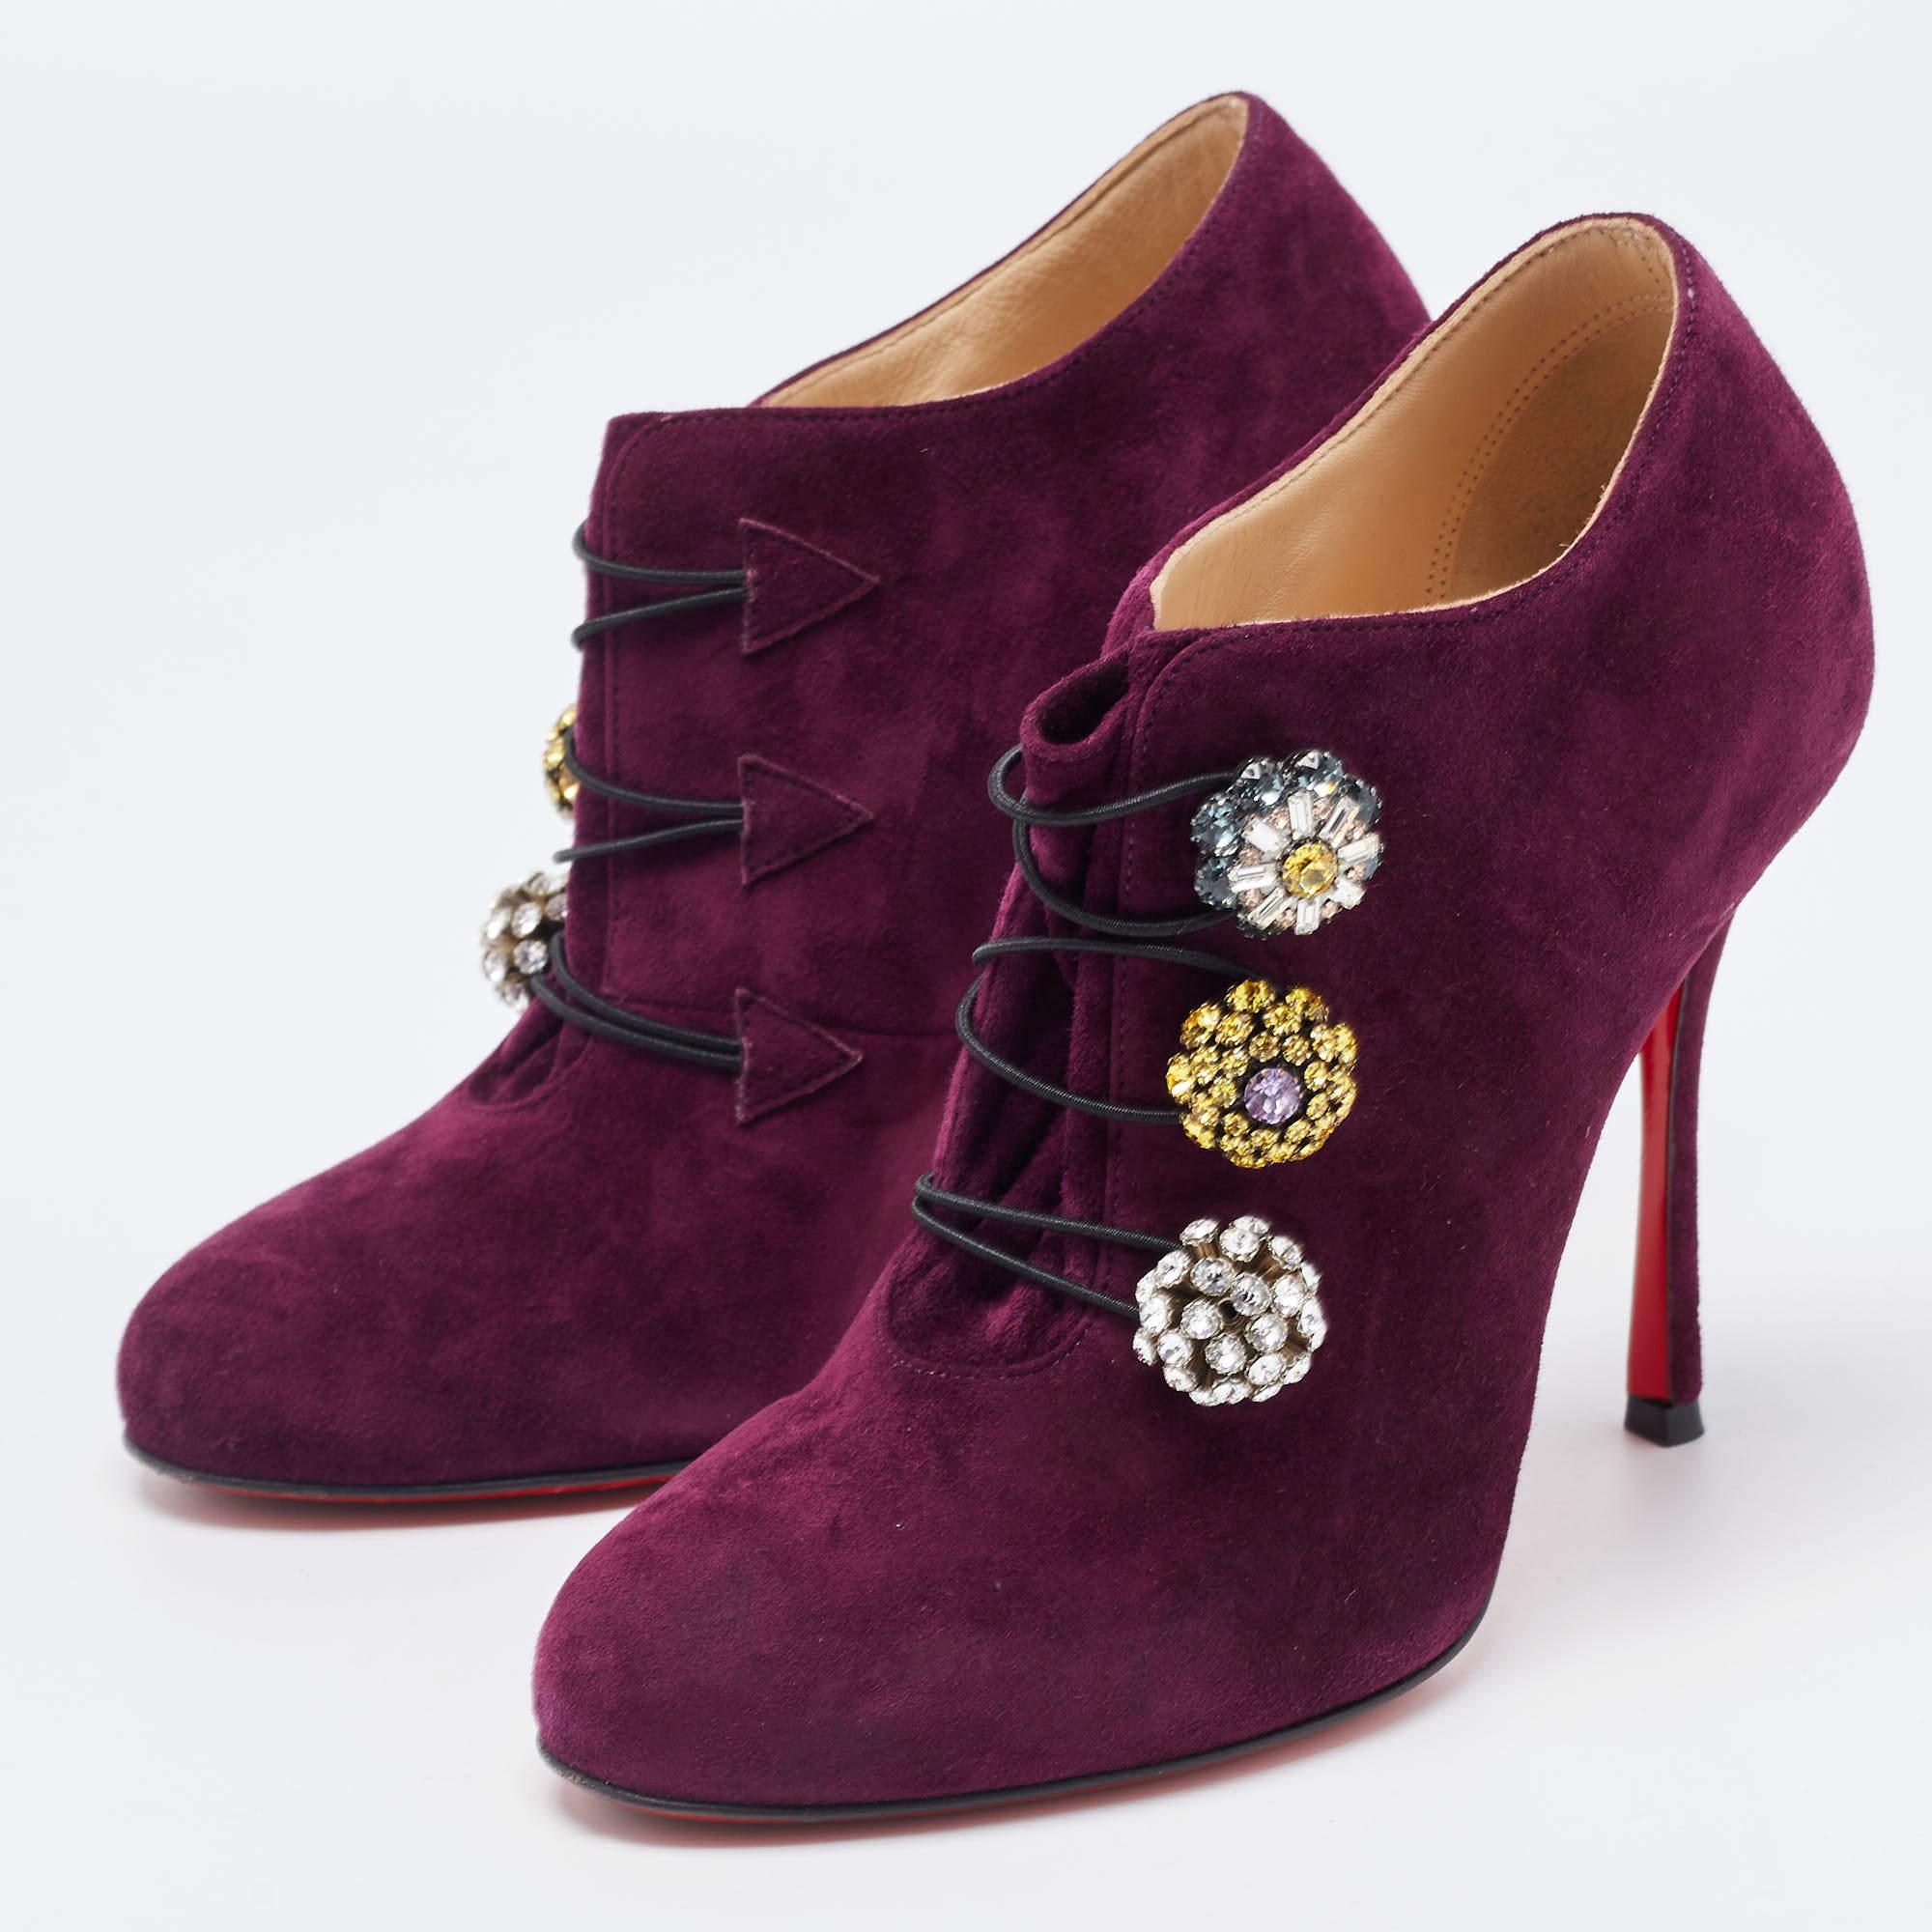 Christian Louboutin Purple Suede Booties Size 35.5 For Sale 2